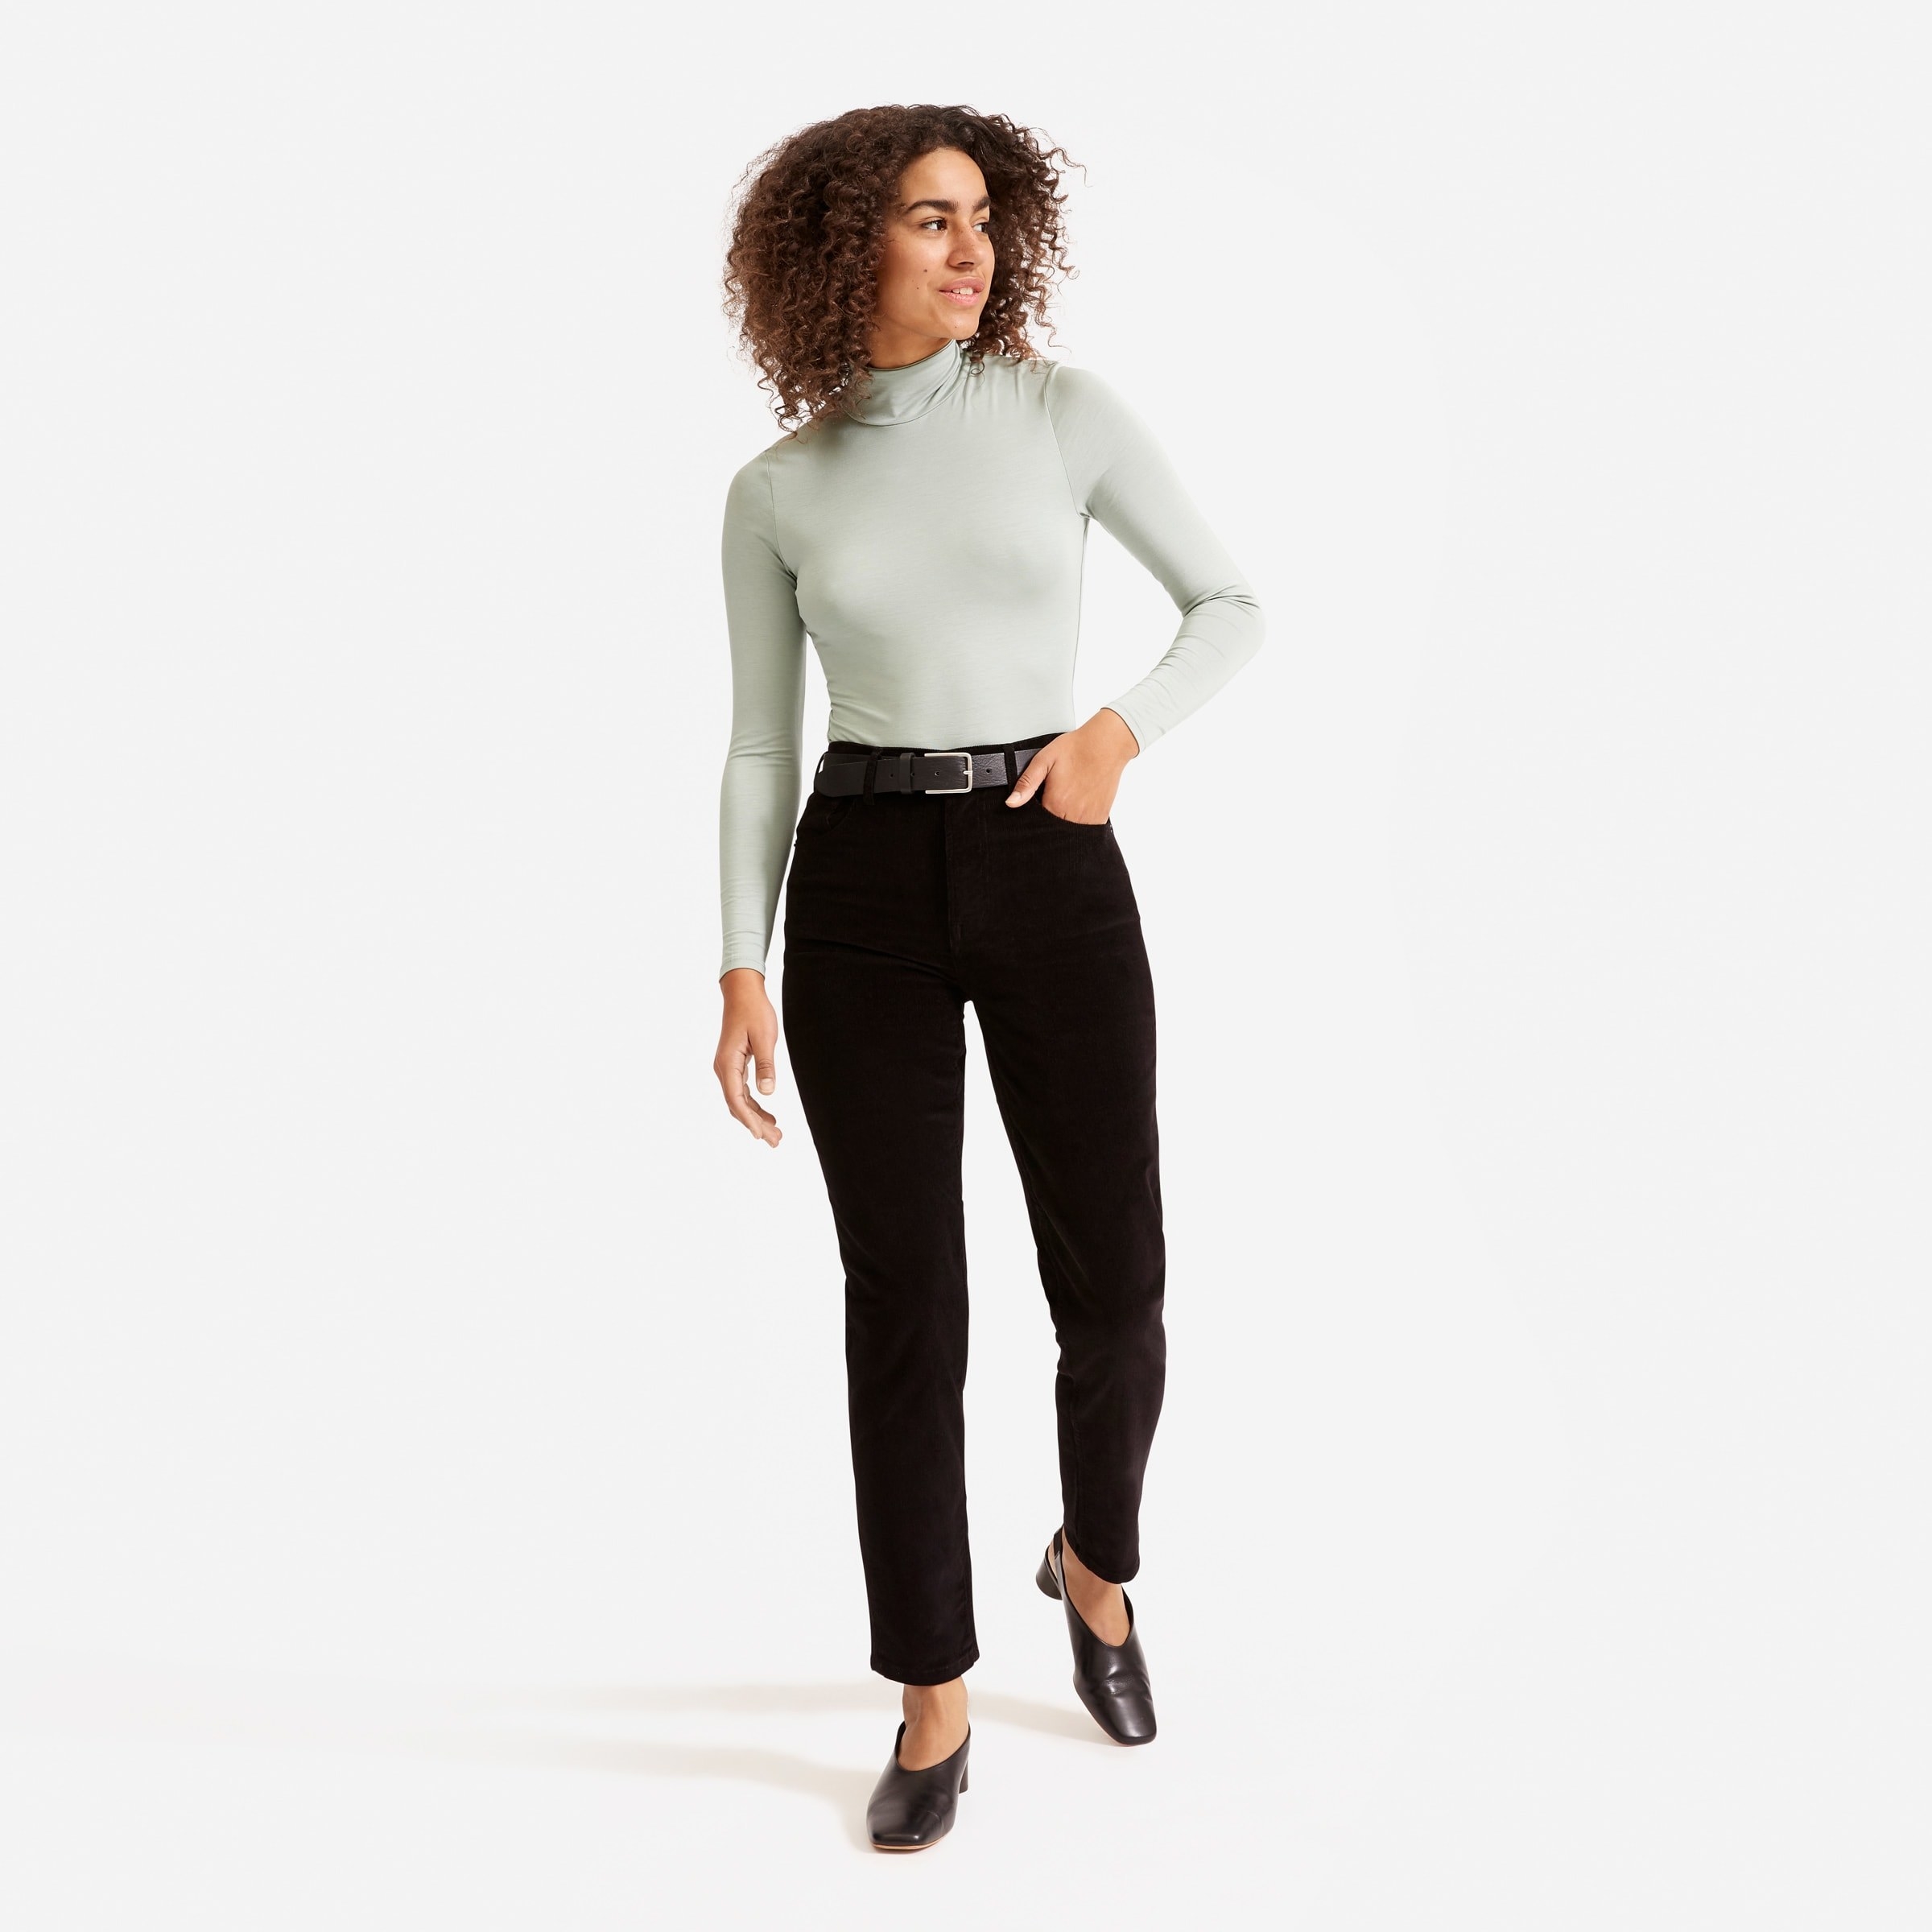 a model in a green turtleneck and black corduroy pants